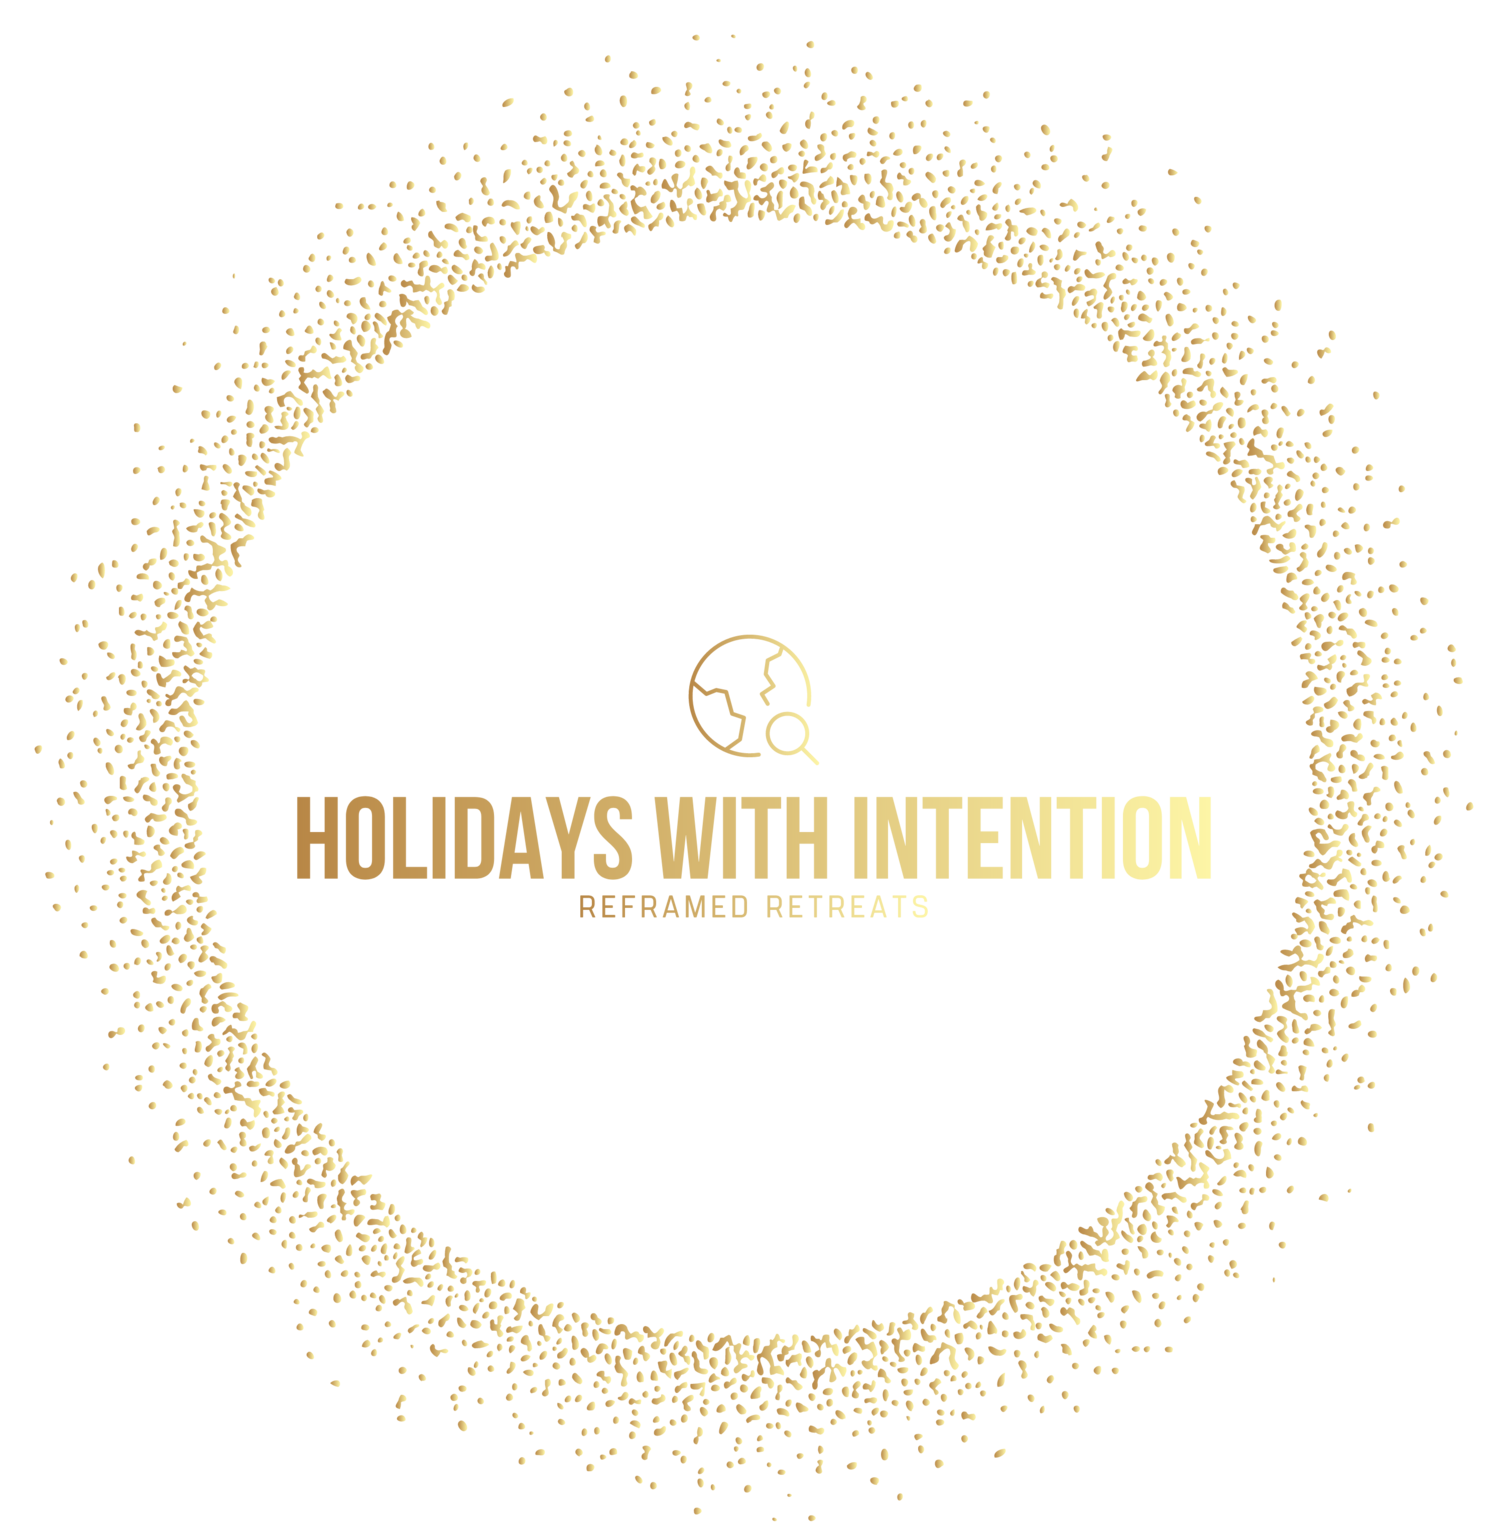 Holidays with intention